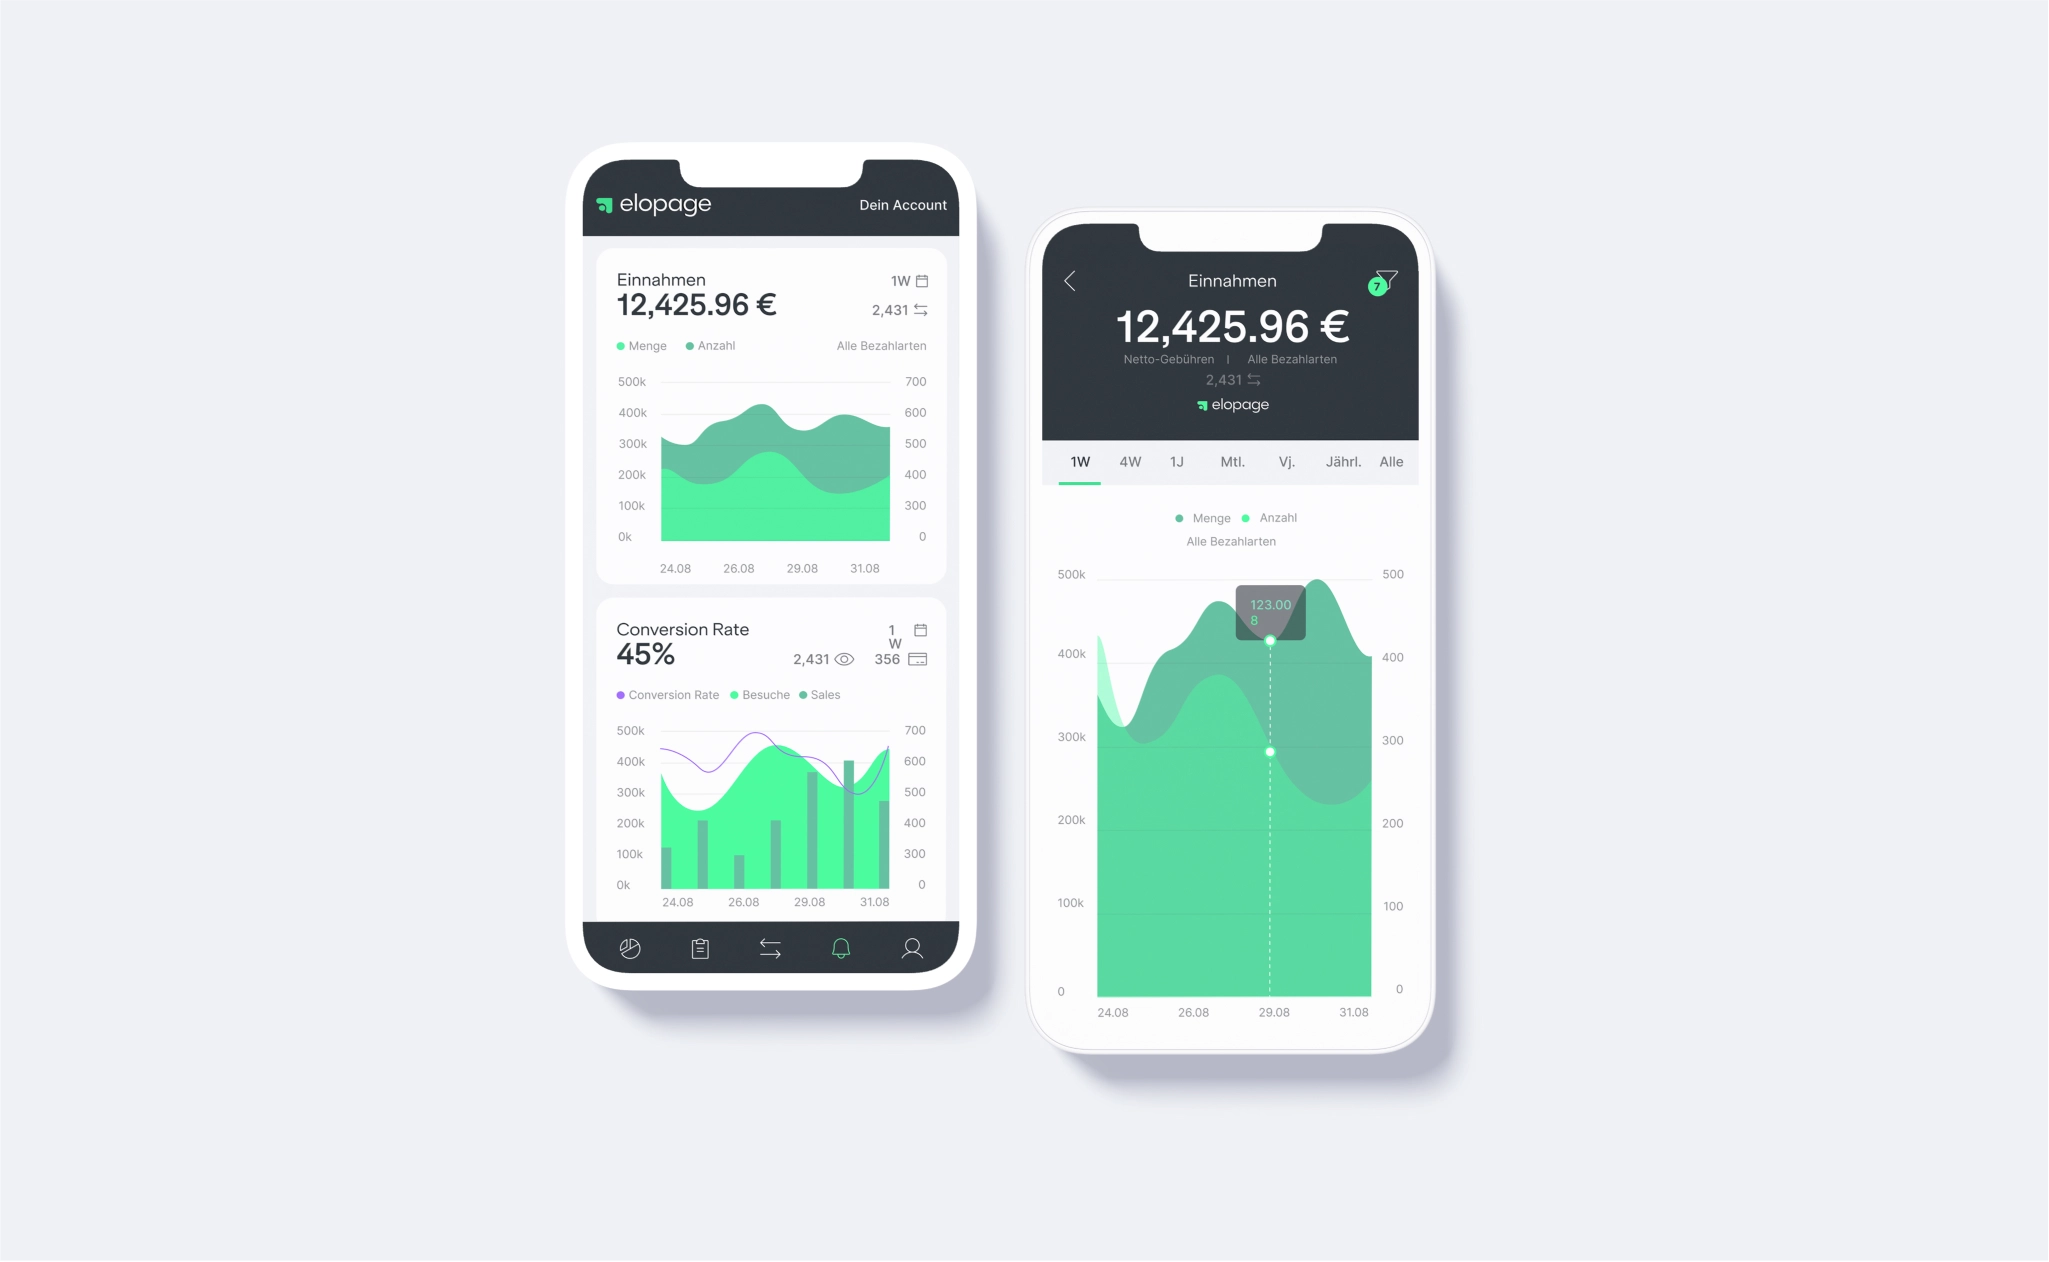 See your business metrics via the dashboard in the business app